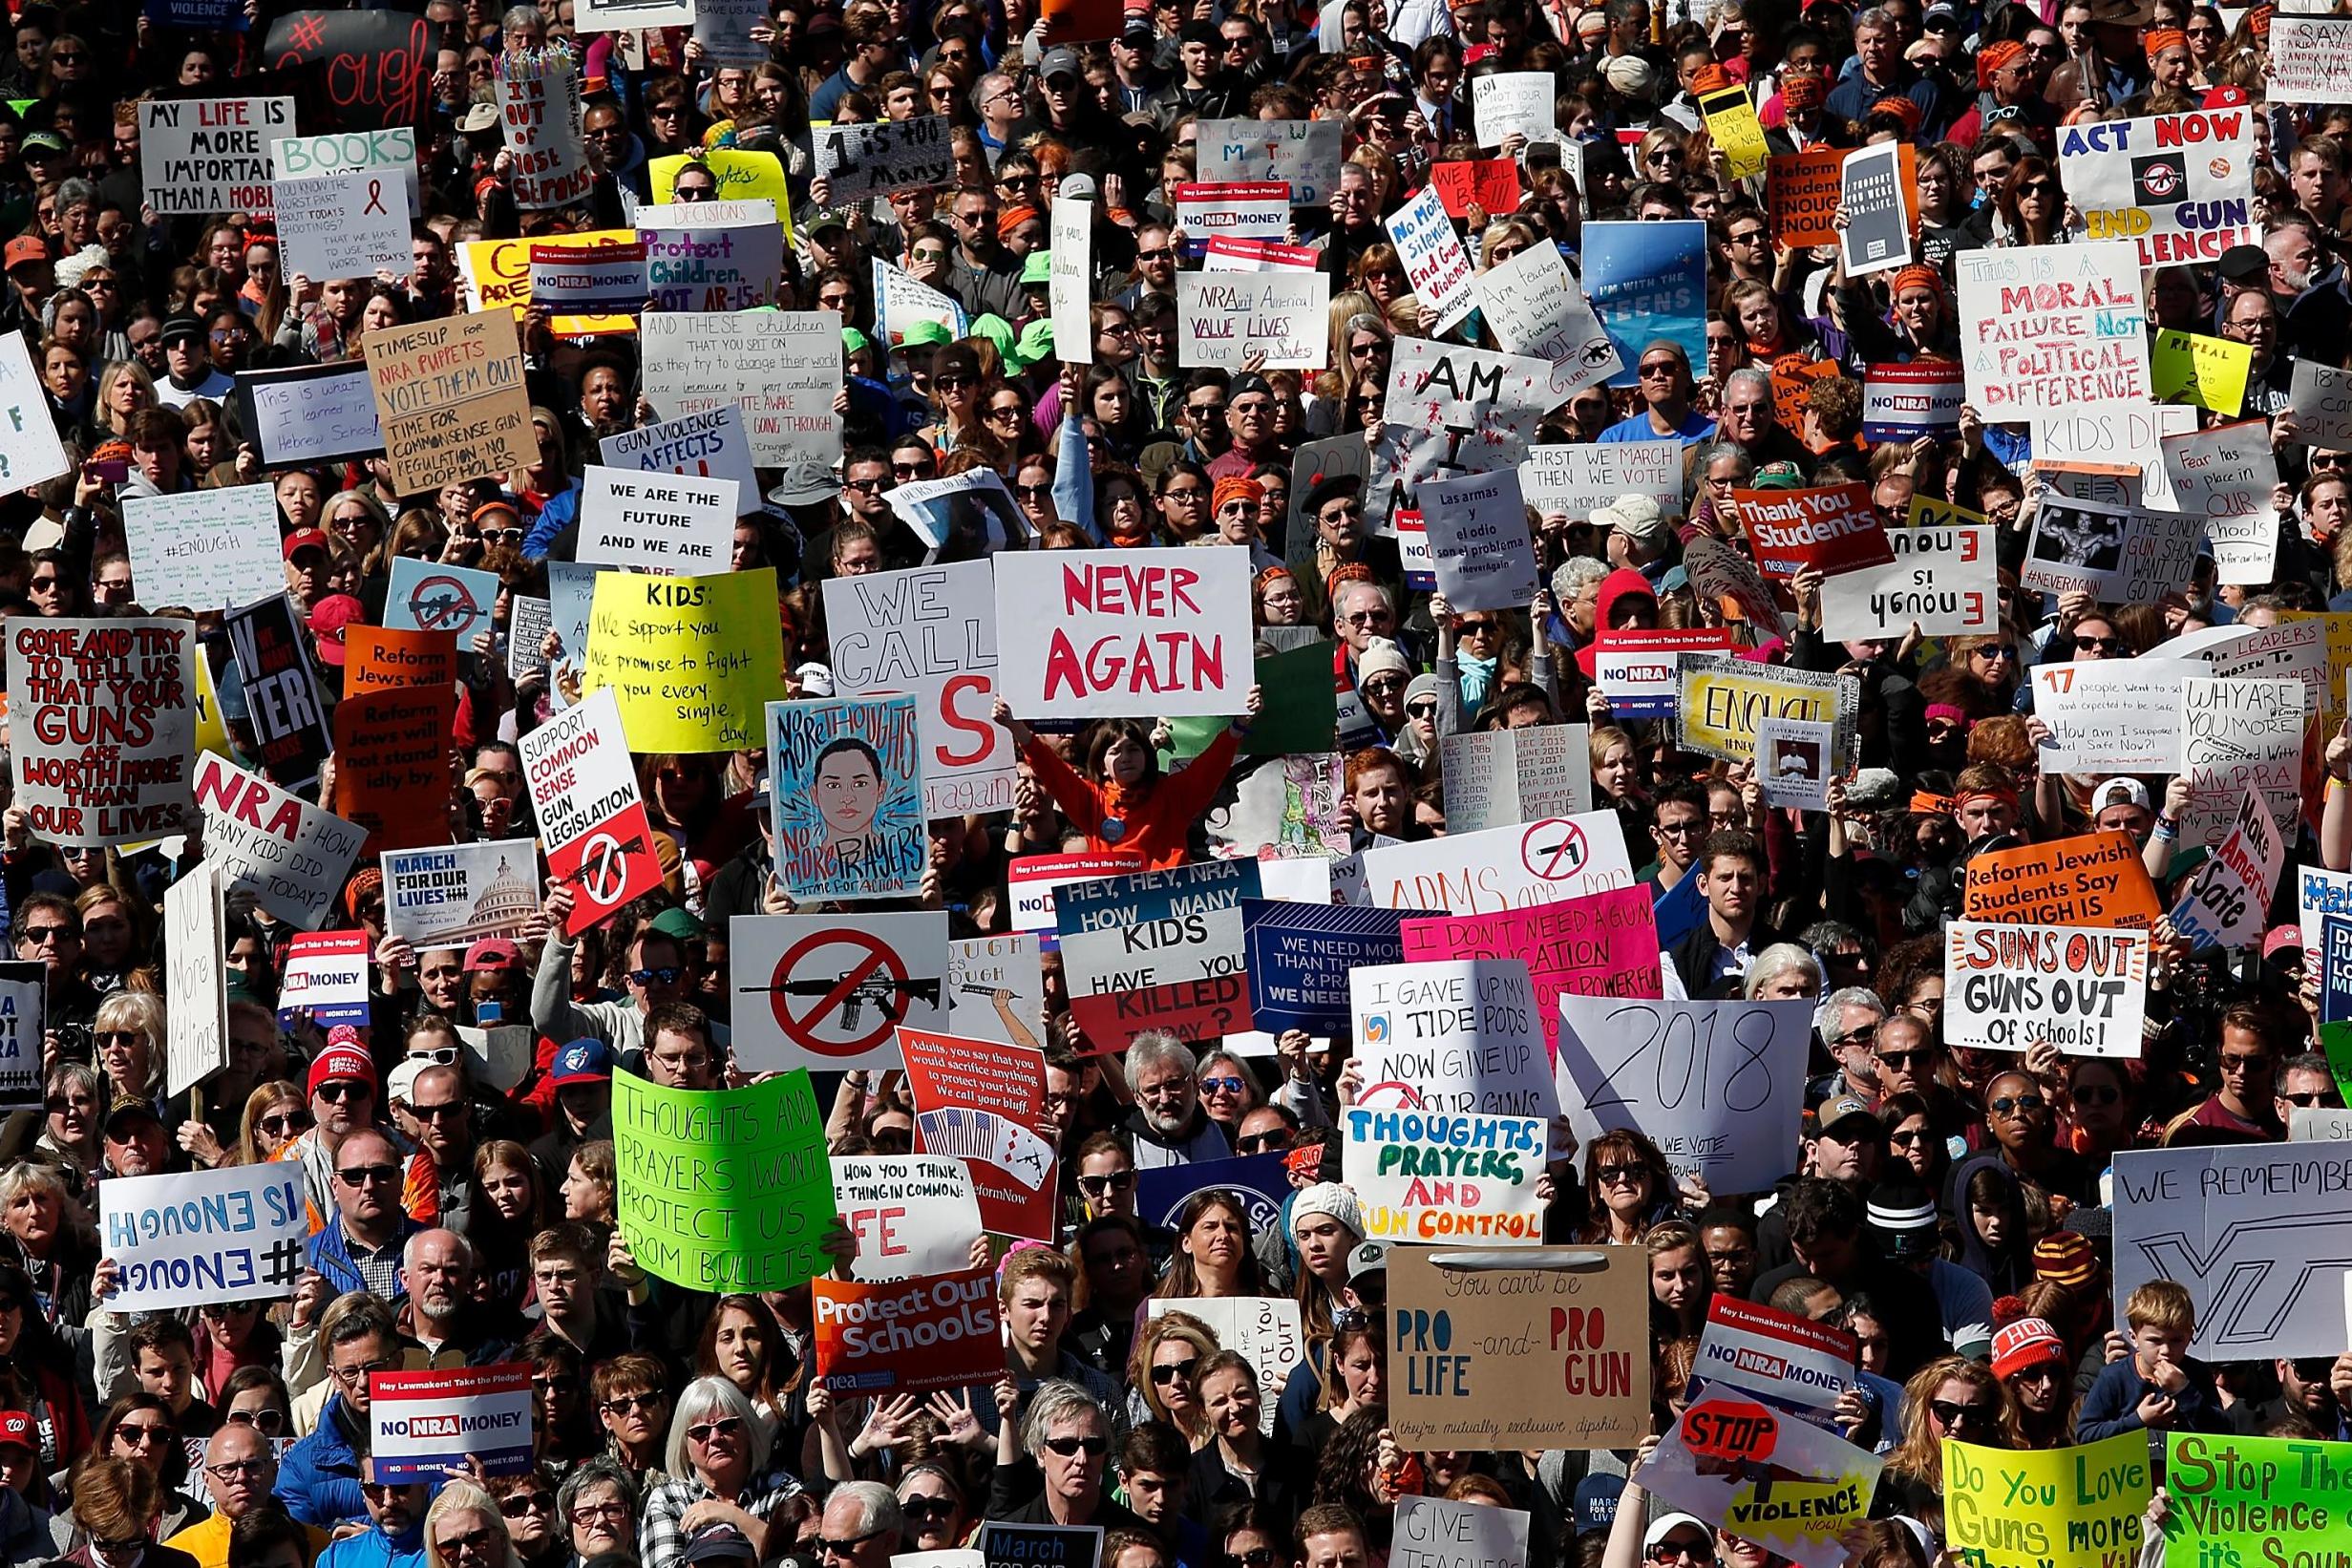 Hundreds of thousands of gun reform advocates attended the March for Our Lives rally on 24 March 2018 but a new study suggests gun owners are more politically active